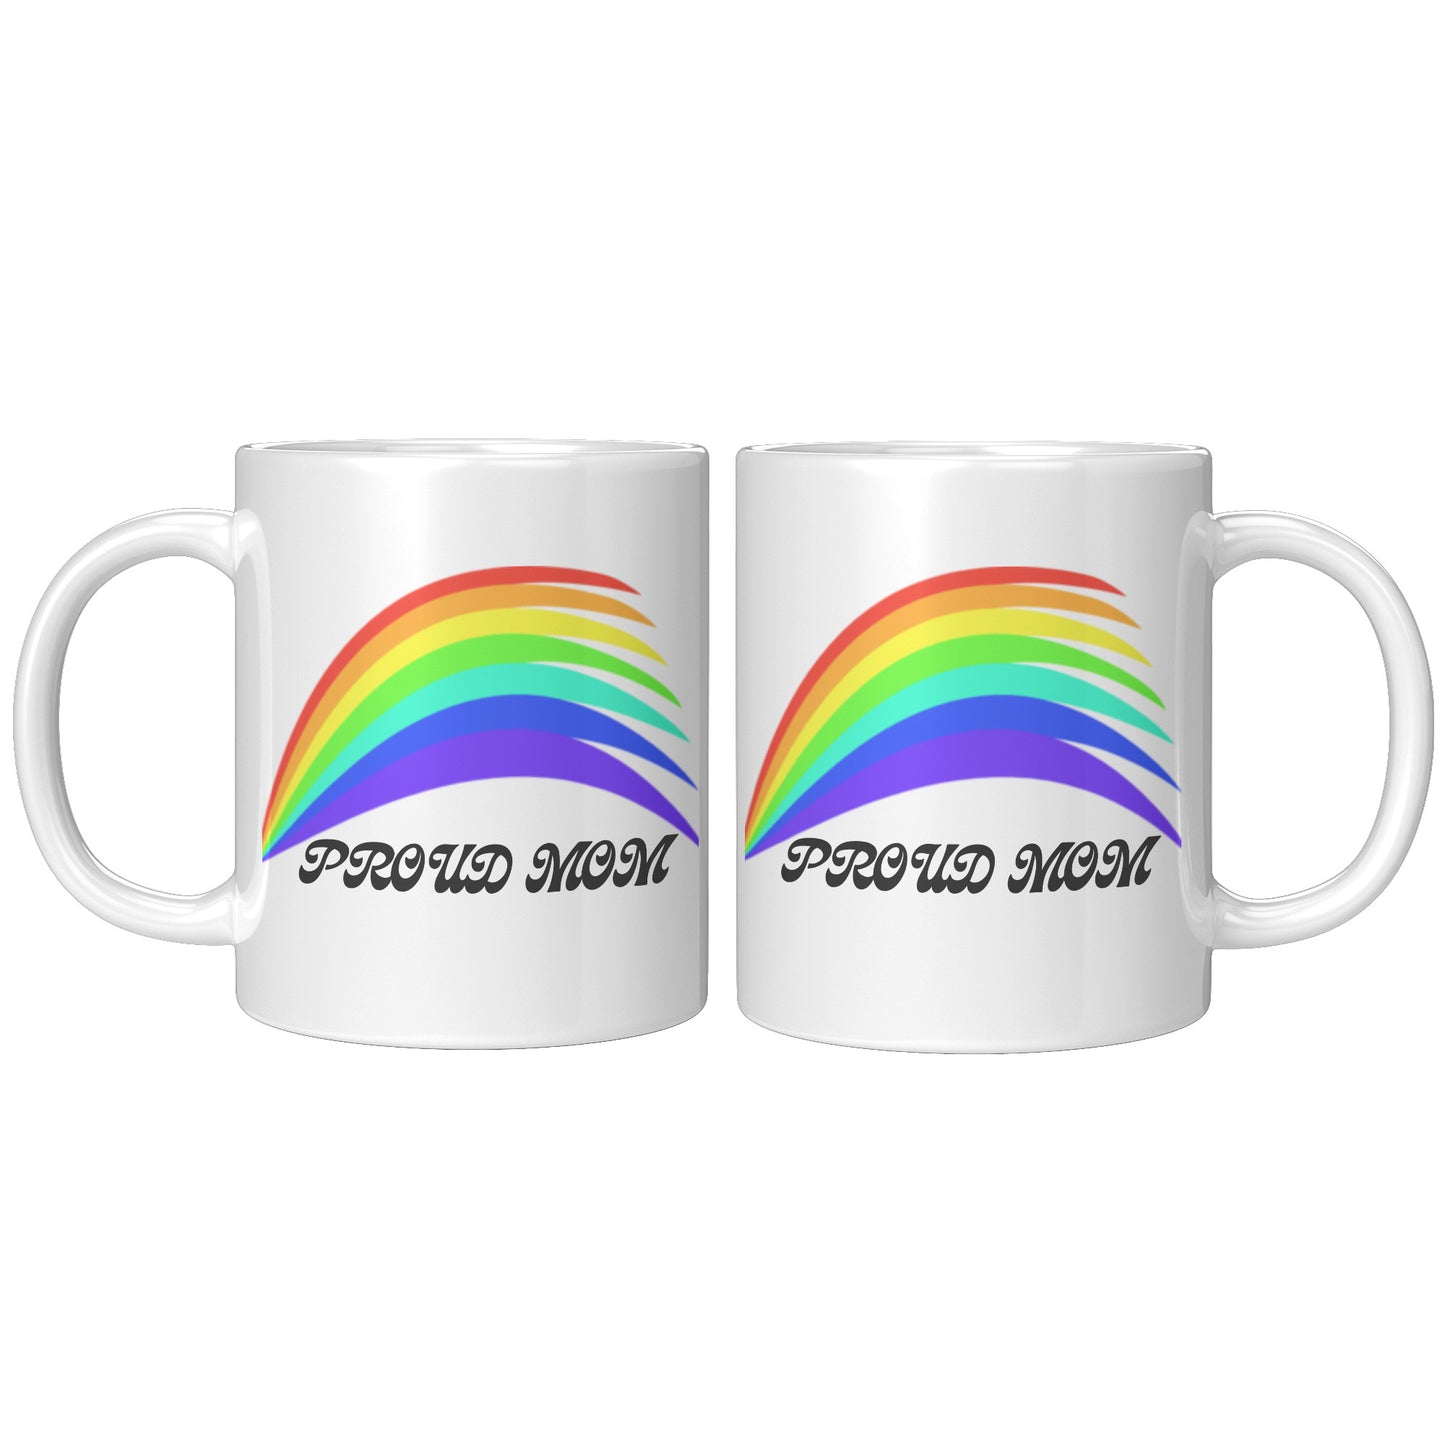 LGBTQ+ Pride Rainbow Mug For Mom To Support Your Loved Ones, White With Colourful Design